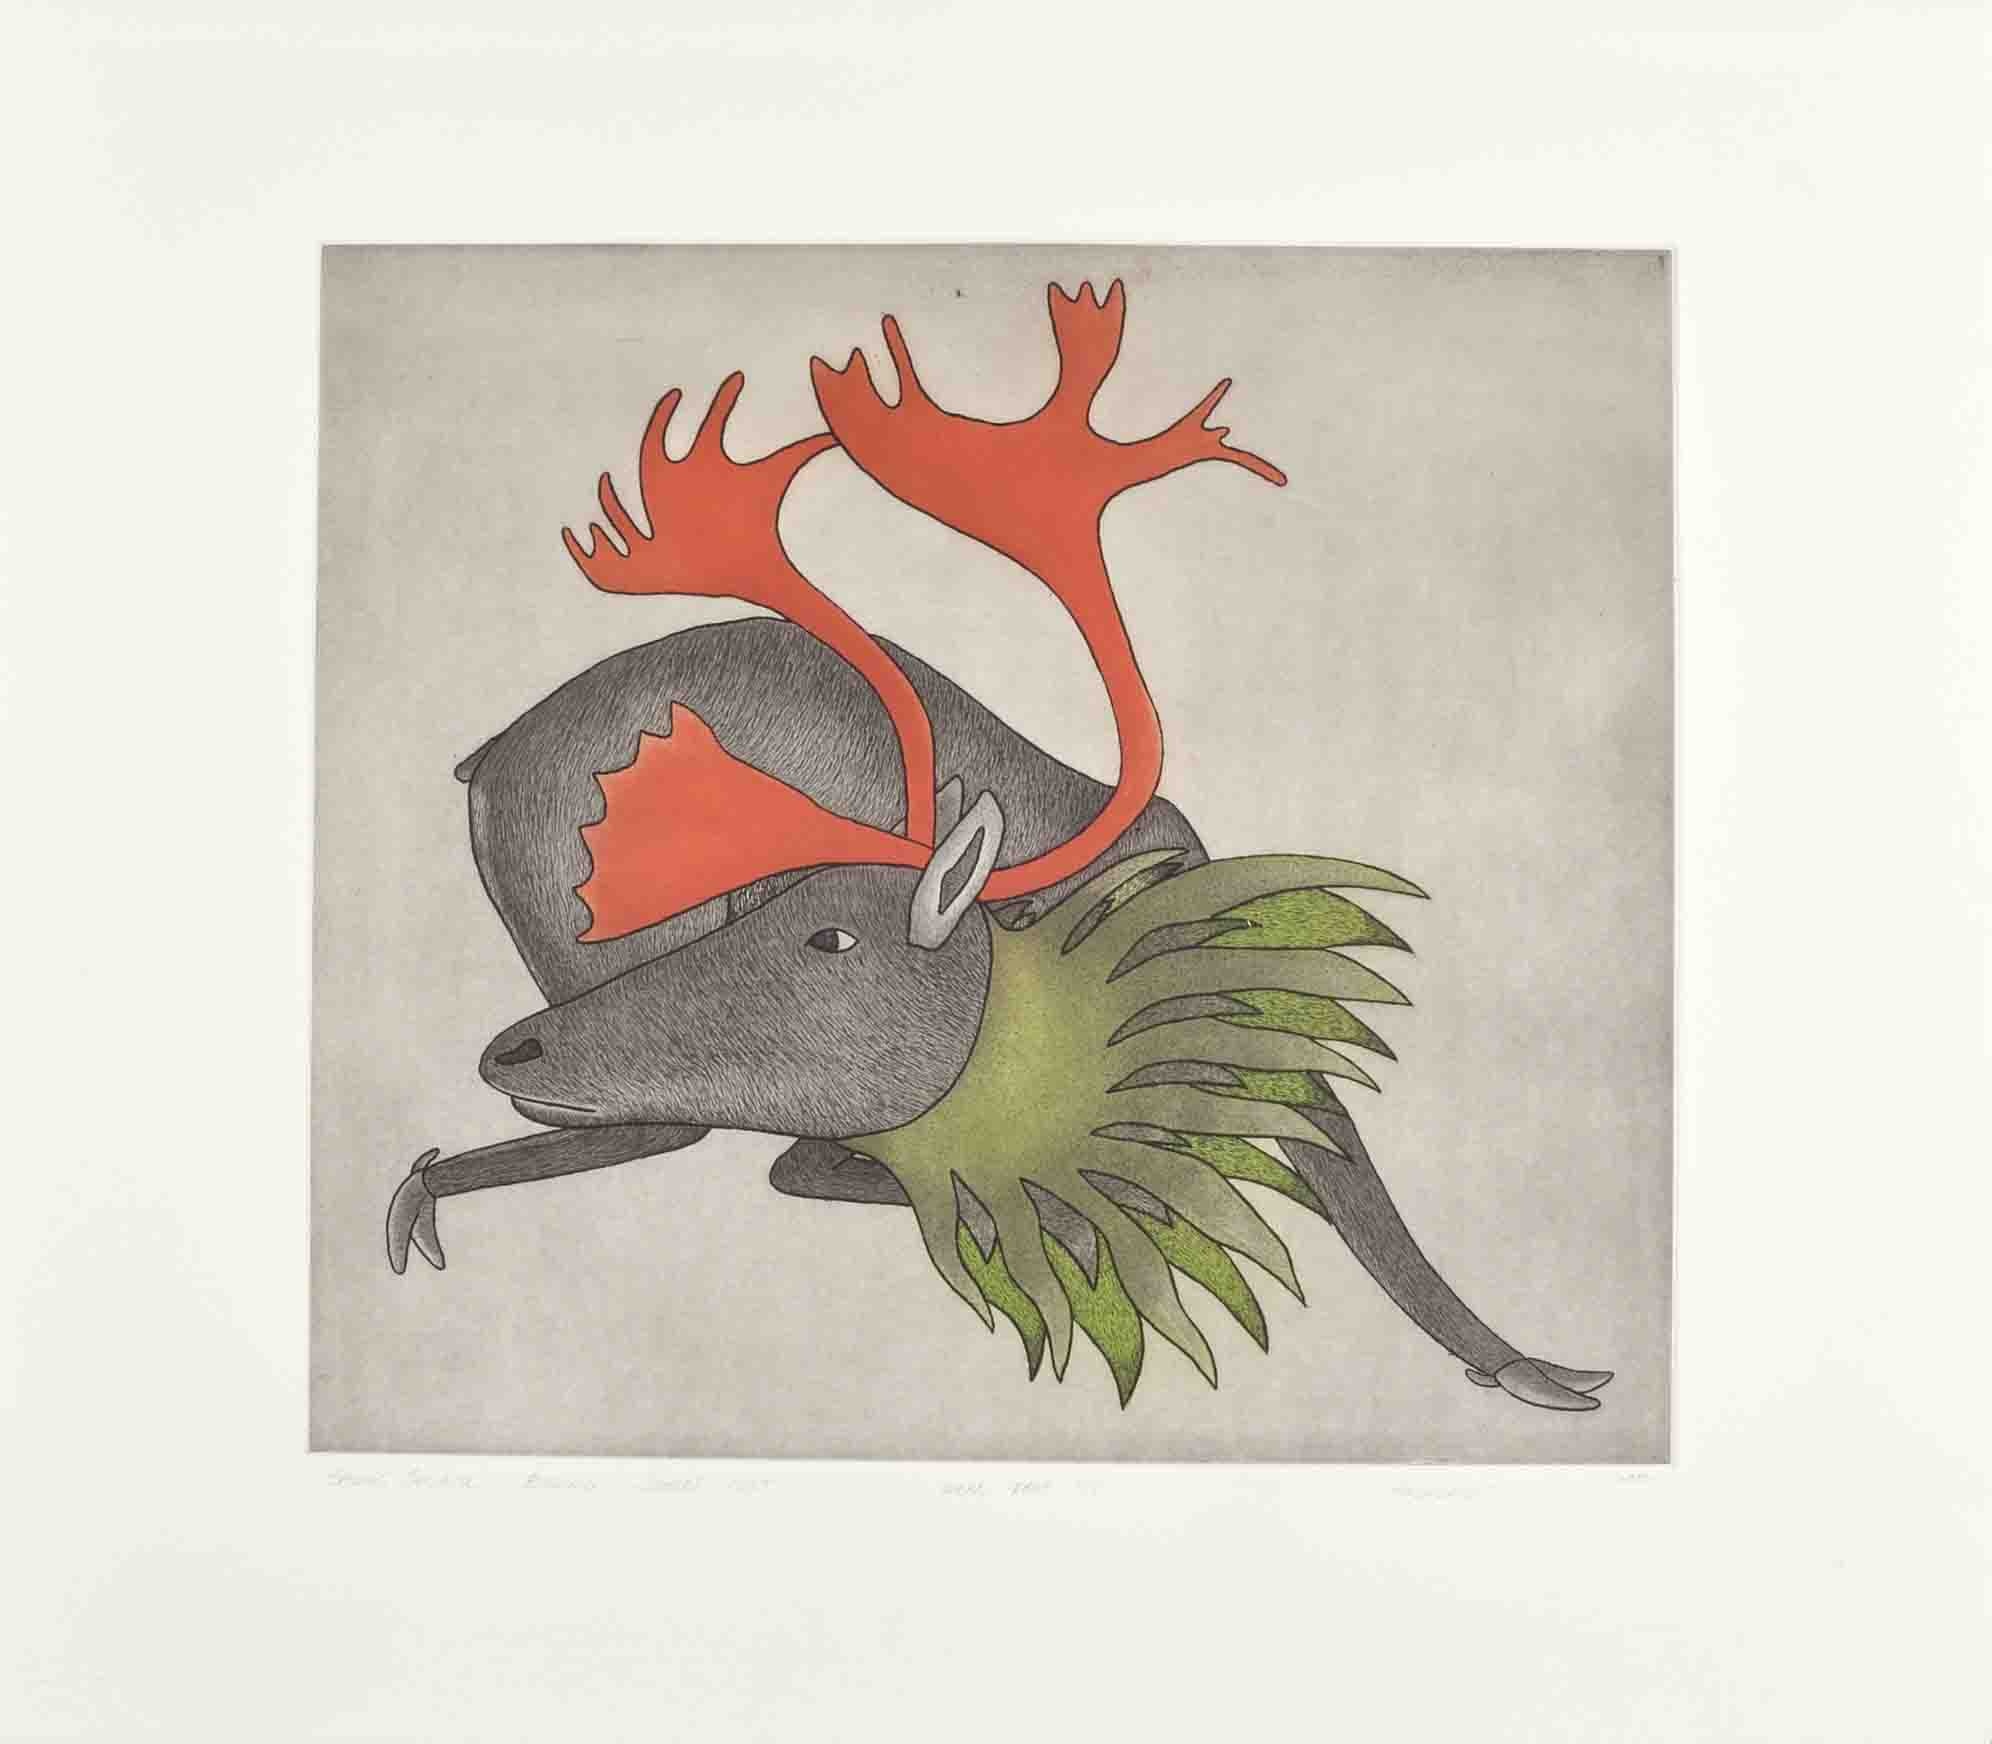 Kavavaow Mannomee Cape Dorset Inuit Etching and aquatint 24 x 27 1200 spring caribou 1995